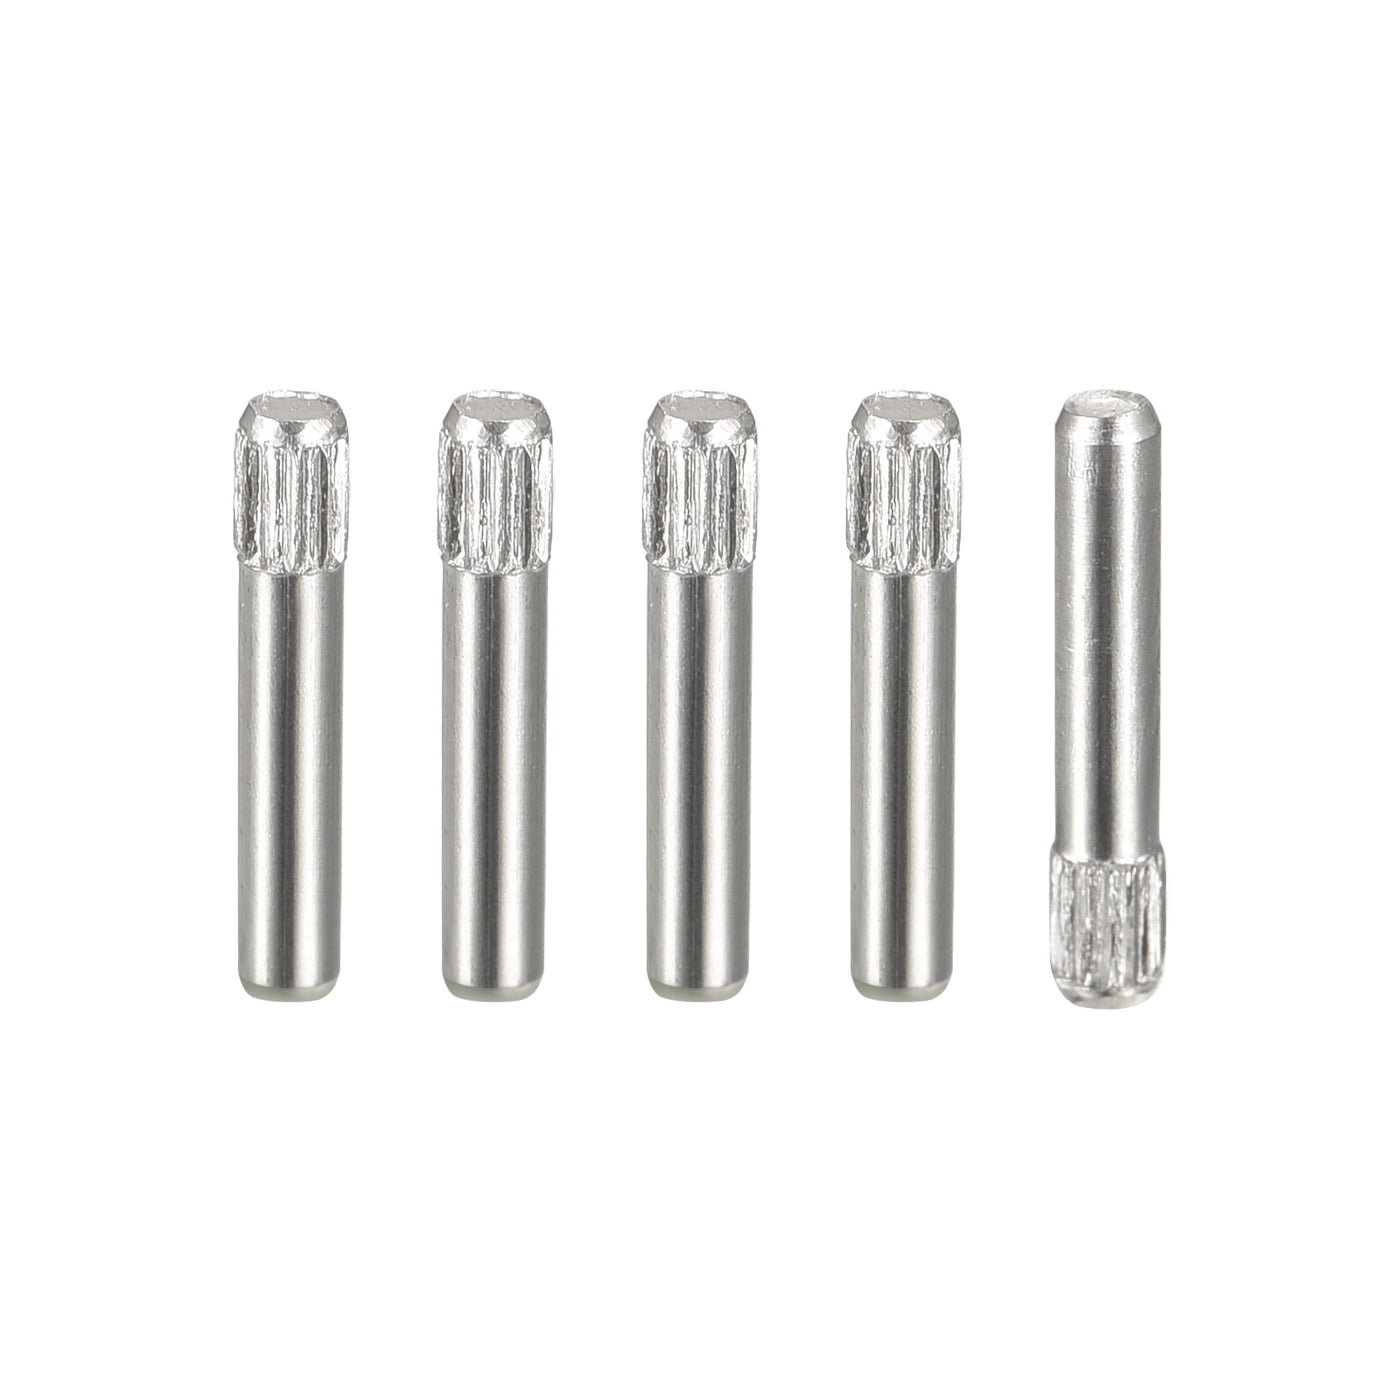 uxcell Uxcell 2x12mm 304 Stainless Steel Dowel Pins, 5Pcs Knurled Head Flat End Dowel Pin